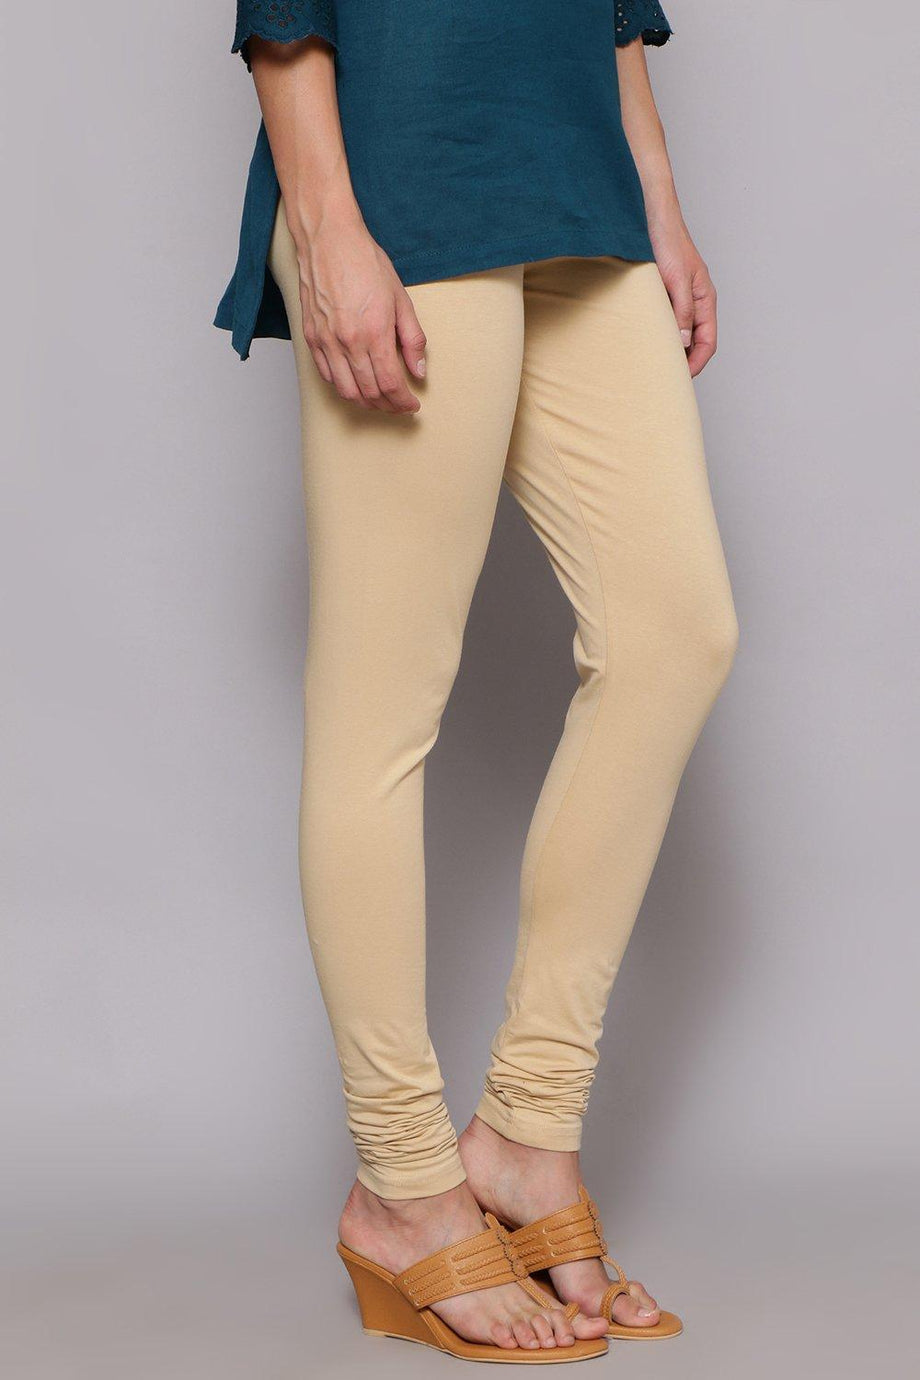 Buy Womens Regular Fit Full Length Cotton For Summer Wear For Free Size  Churidar Legging Pack of -4 Online In India At Discounted Prices